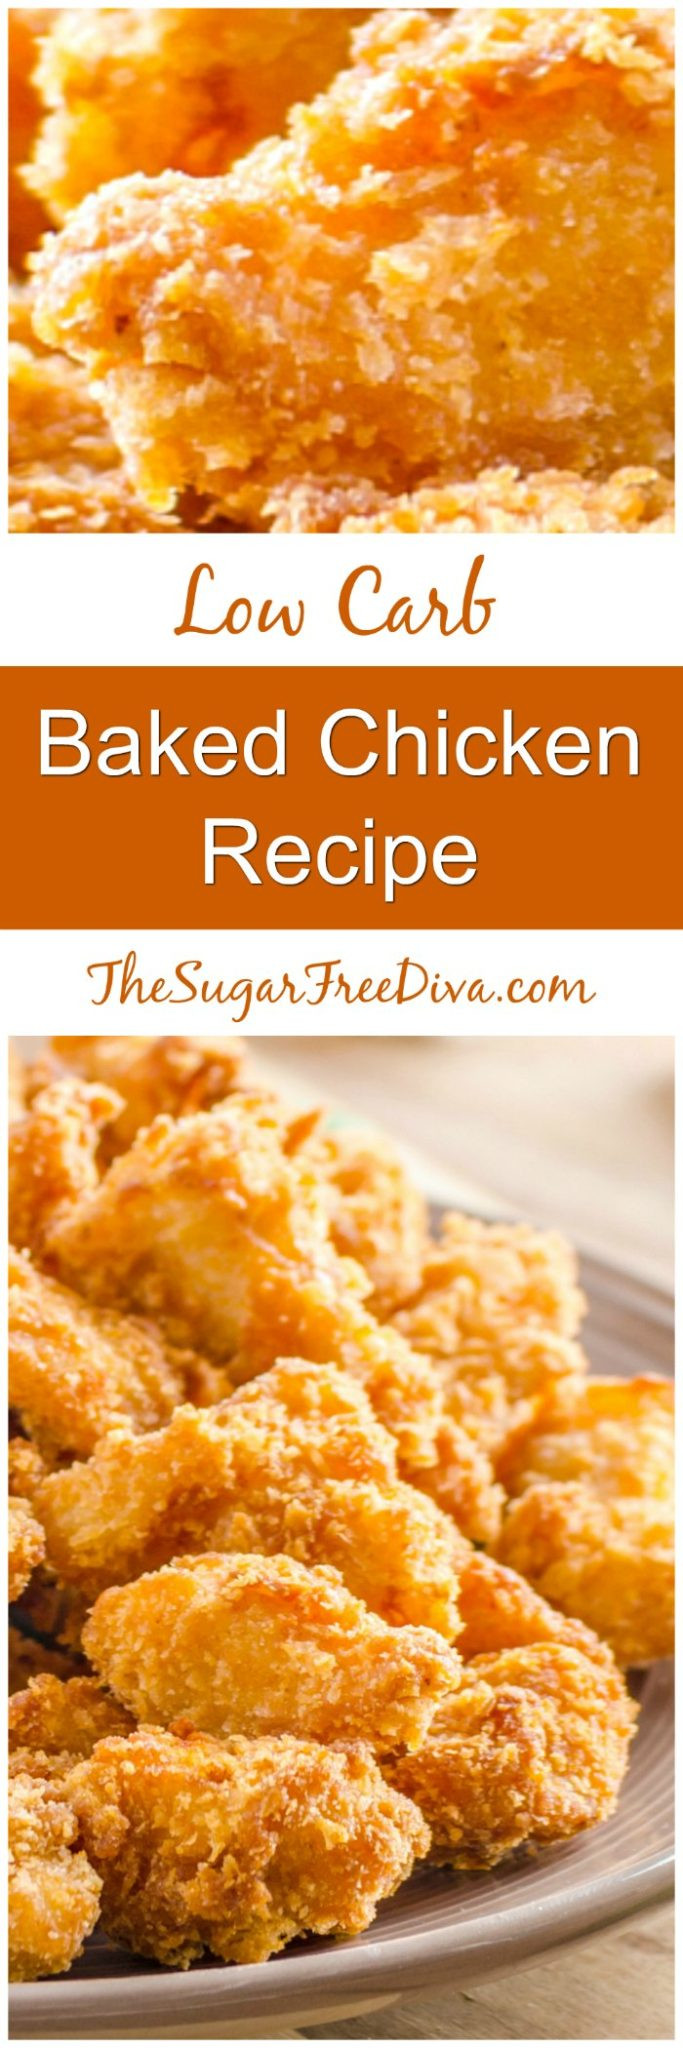 Low Calorie Baked Chicken Recipes
 LOW CARB Baked Chicken Recipe THE SUGAR FREE DIVA